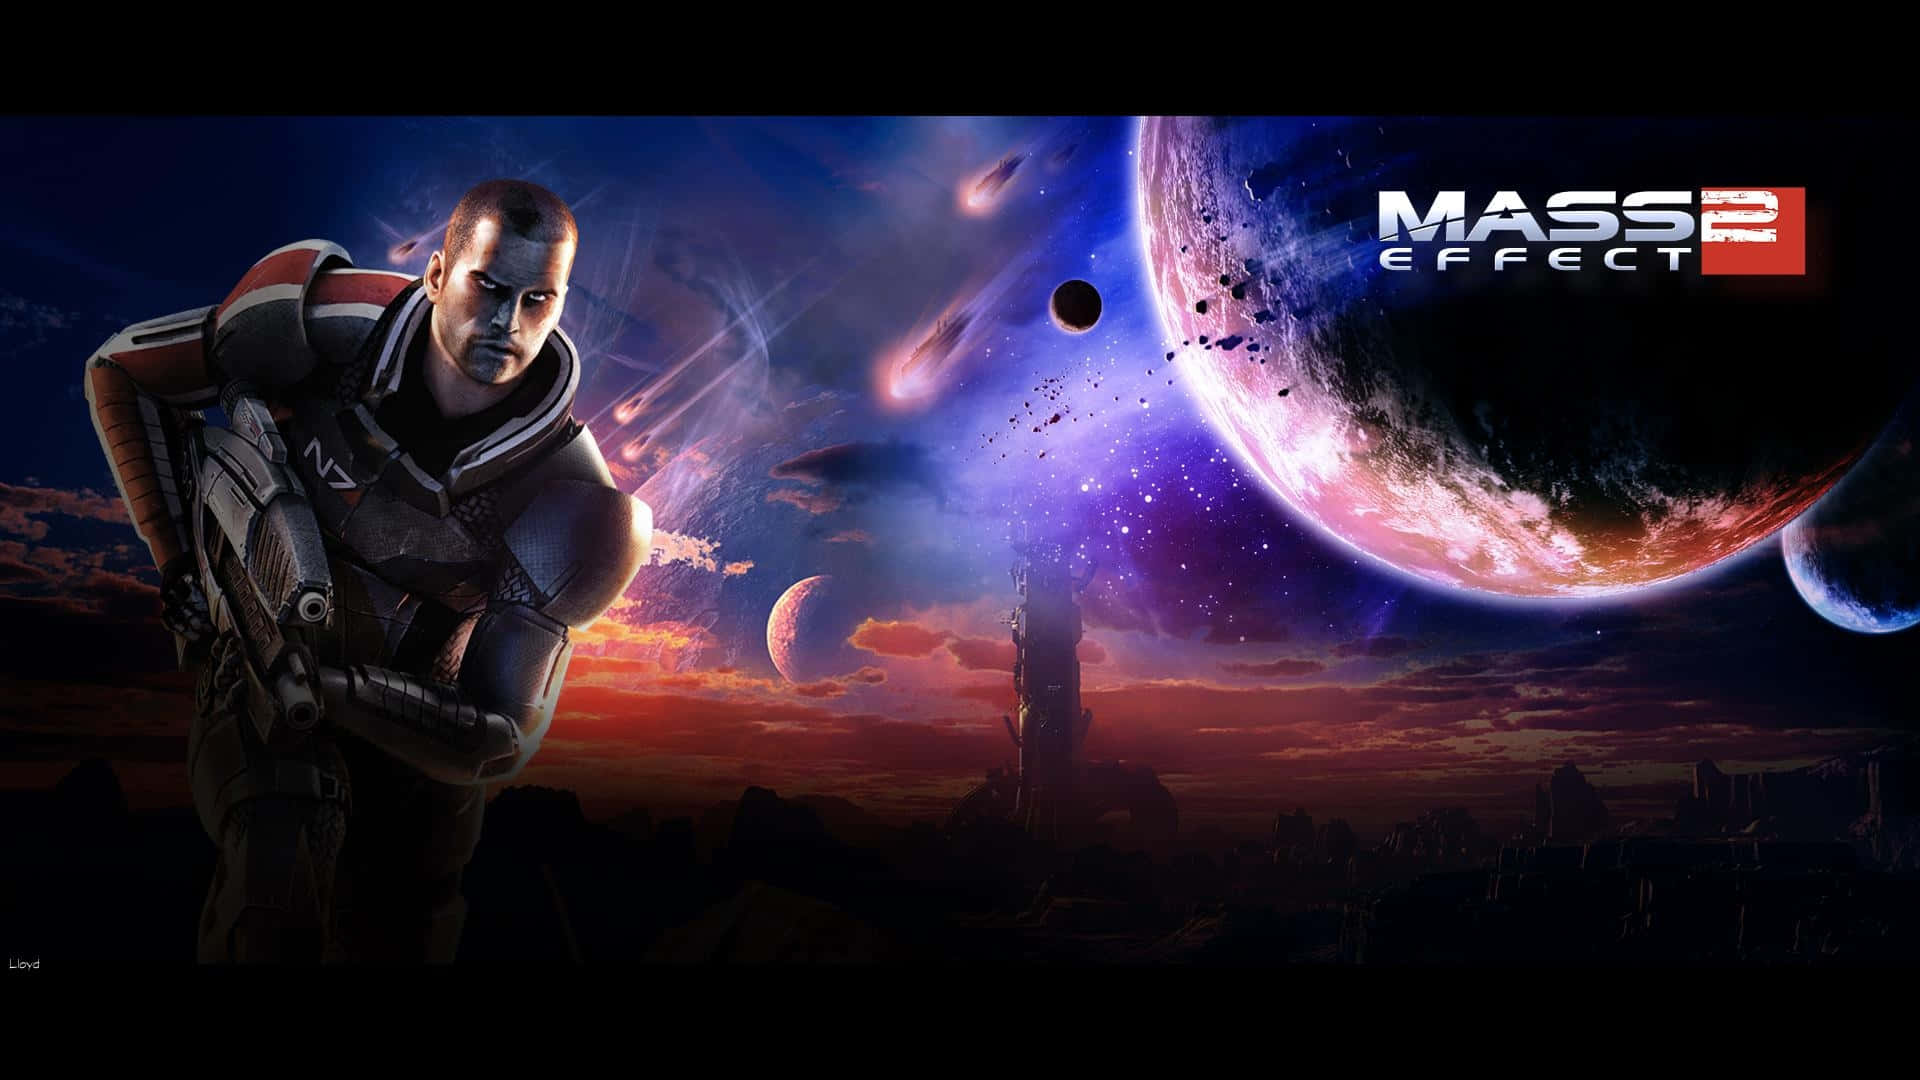 Commander Shepard and the Squad in Mass Effect 2 Wallpaper